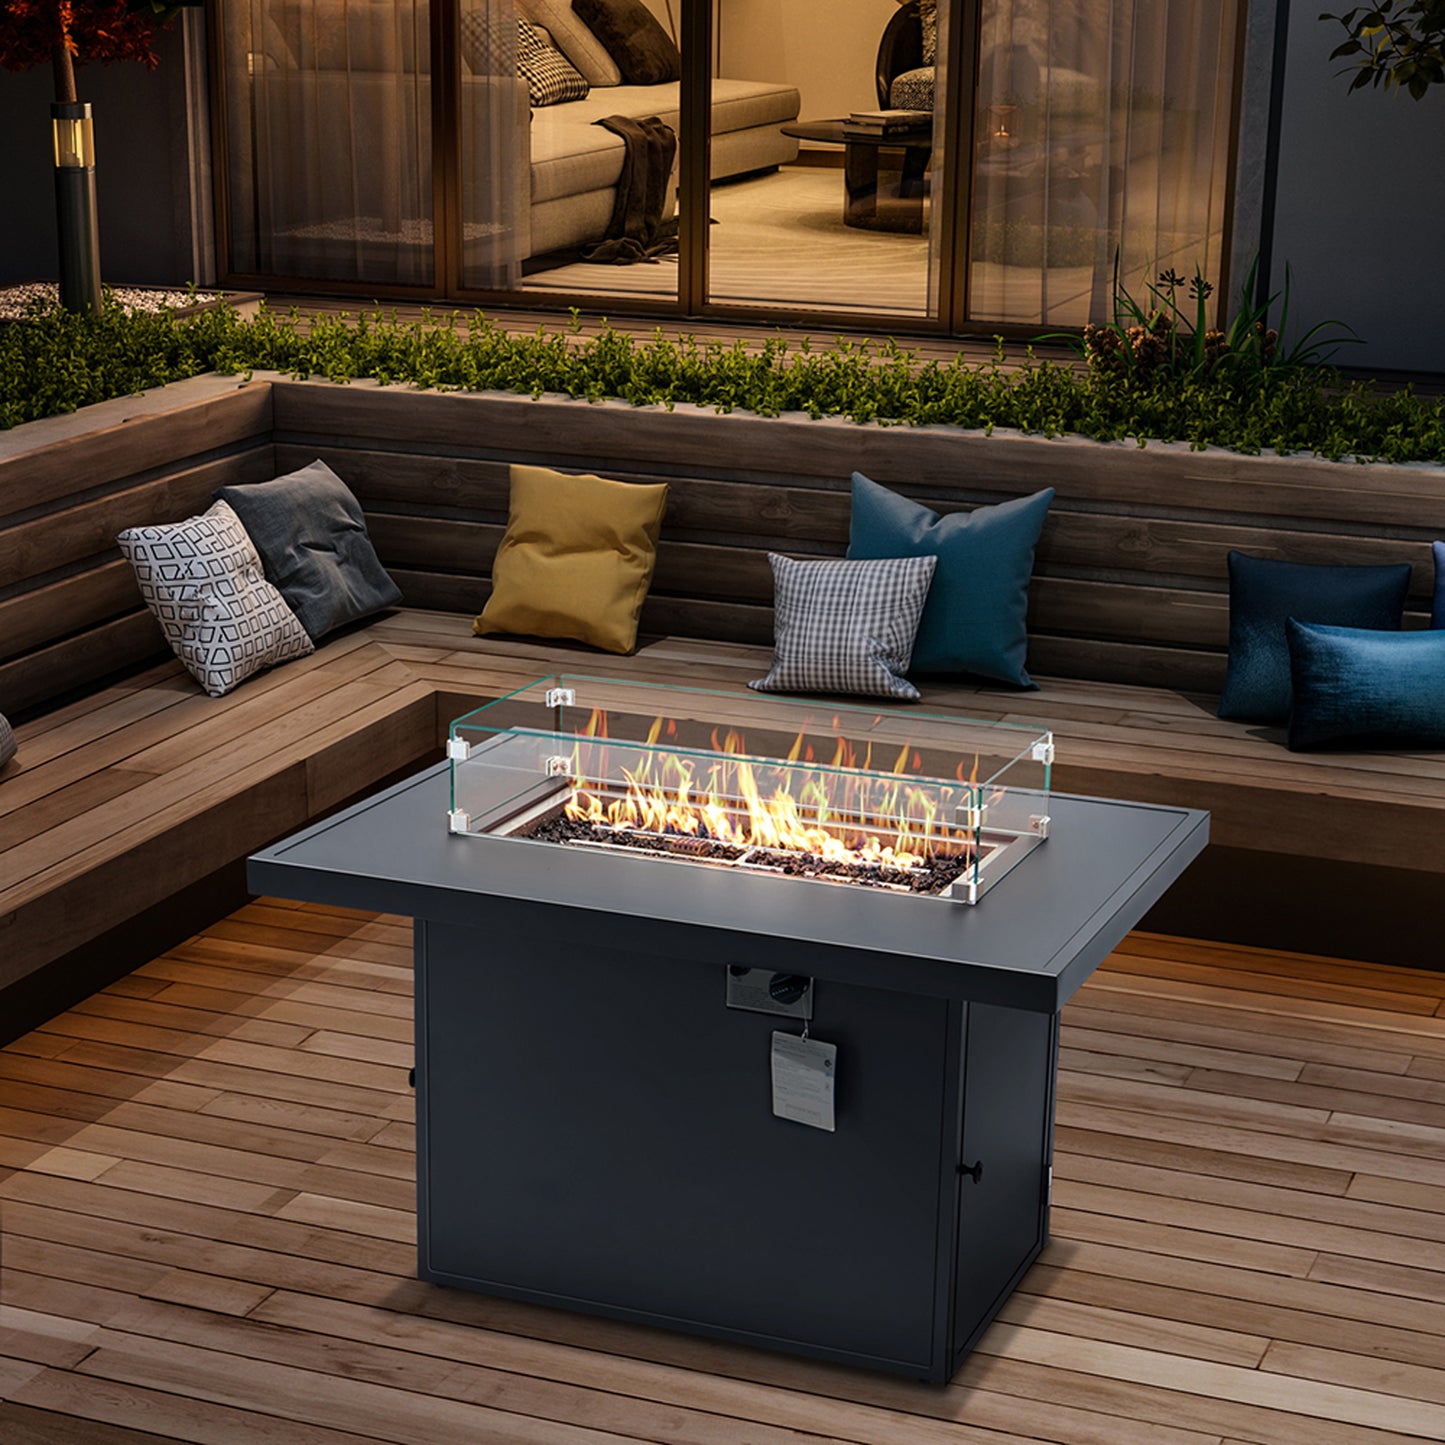 44 inch Gas Fire Pit Table, SYNGAR 2-in-1 55,000 BTU Propane Gas Fire Pit Table, Outdoor Propane Fire Pit with Glass Wind Guard, Black Rocks and Lid, for Patio, Backyard, Garden, Poolside, C03